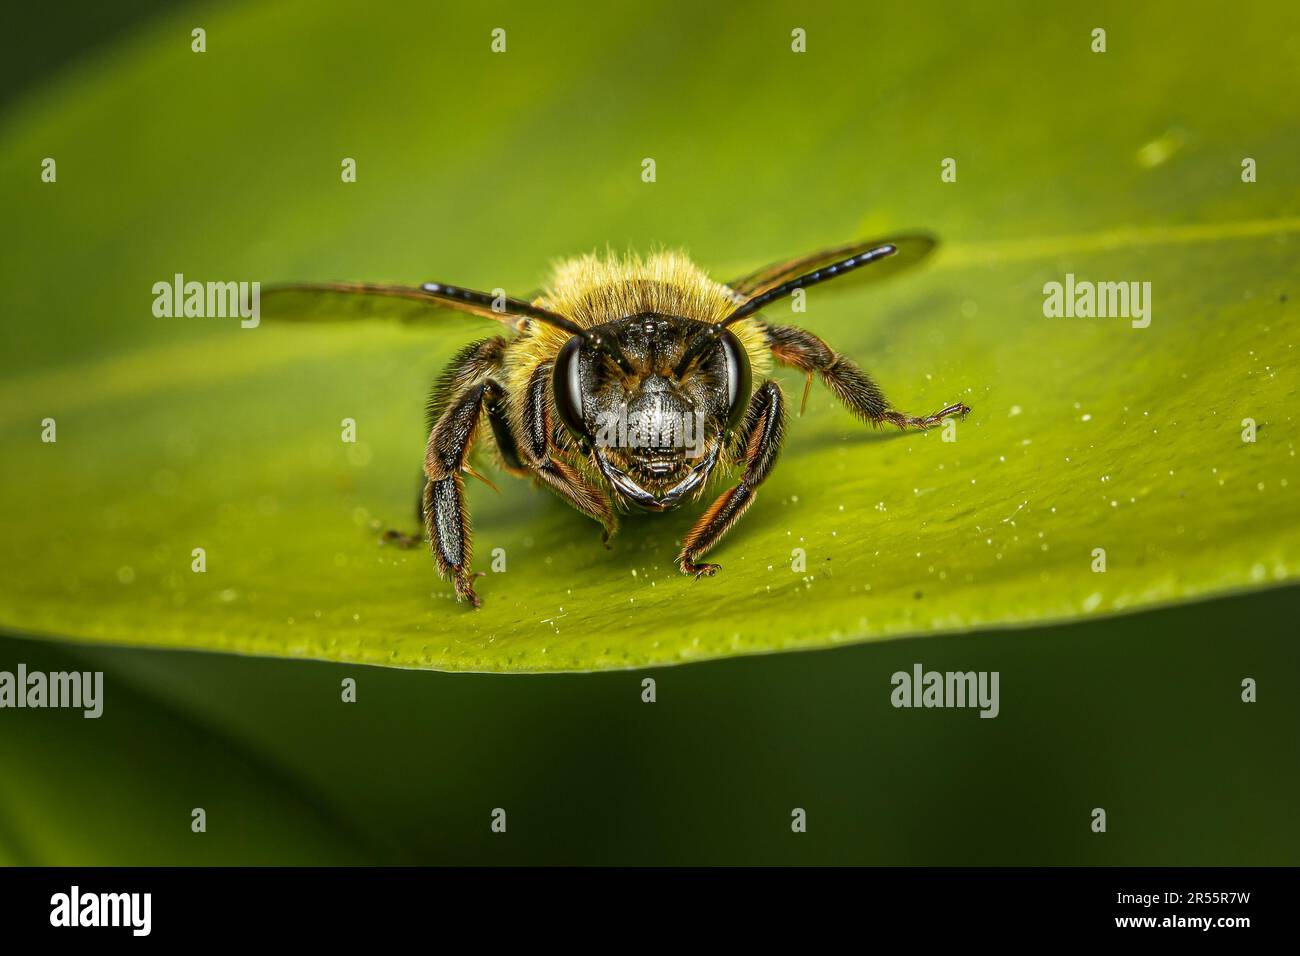 Detailed front view of a wild, UK honey bee at rest on a green leaf. Stock Photo